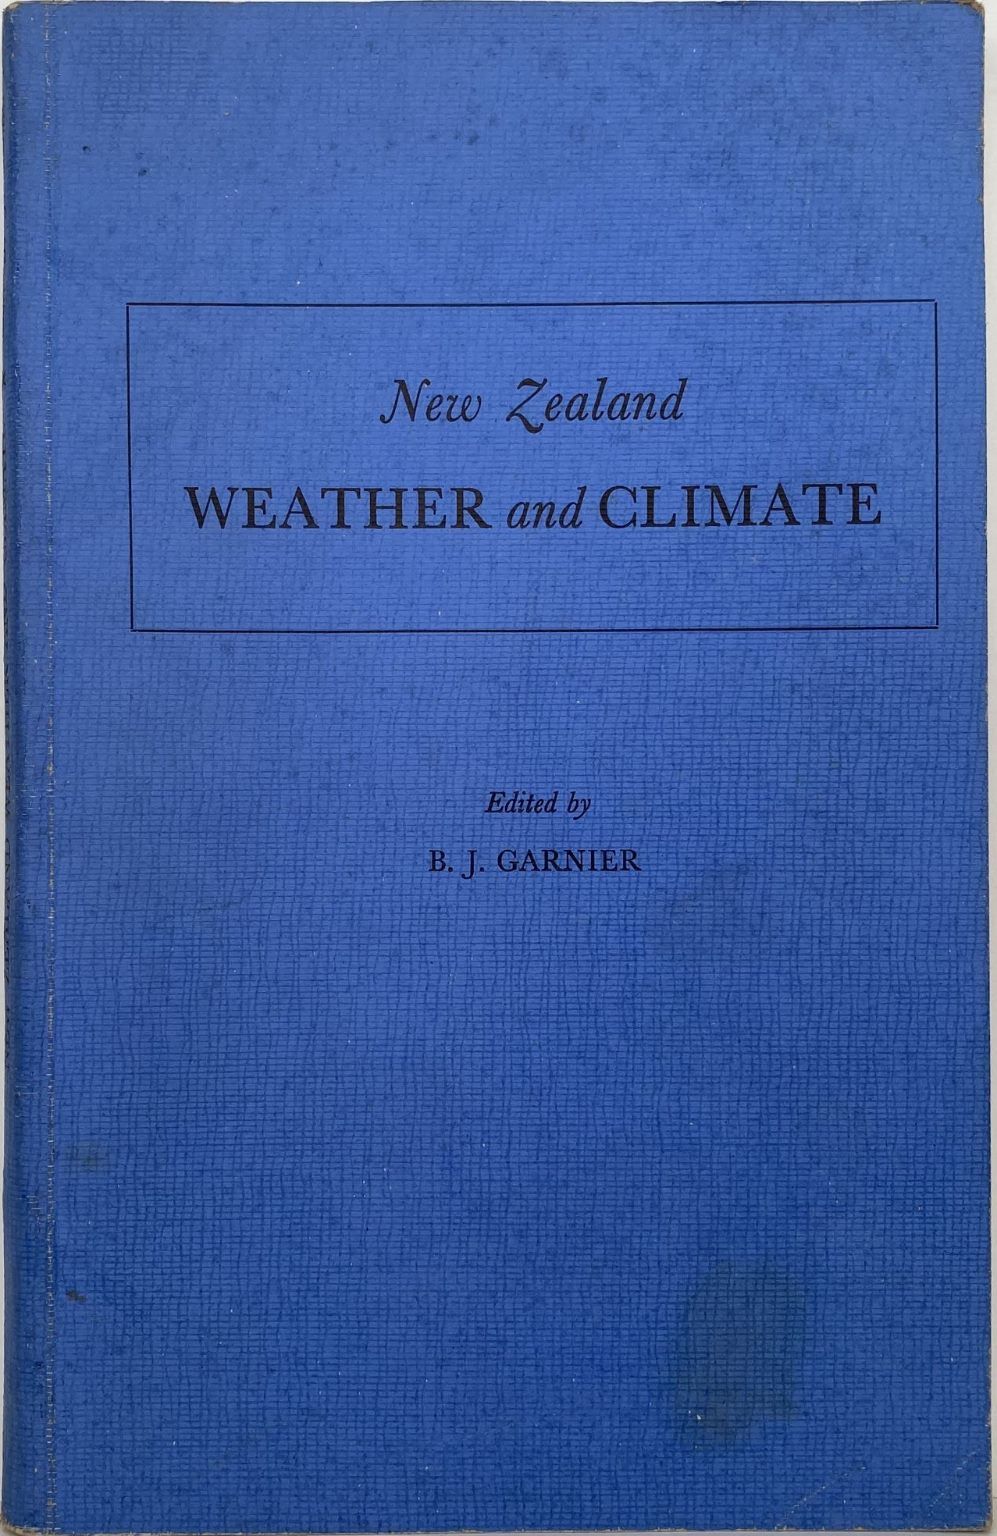 New Zealand WEATHER and CLIMATE